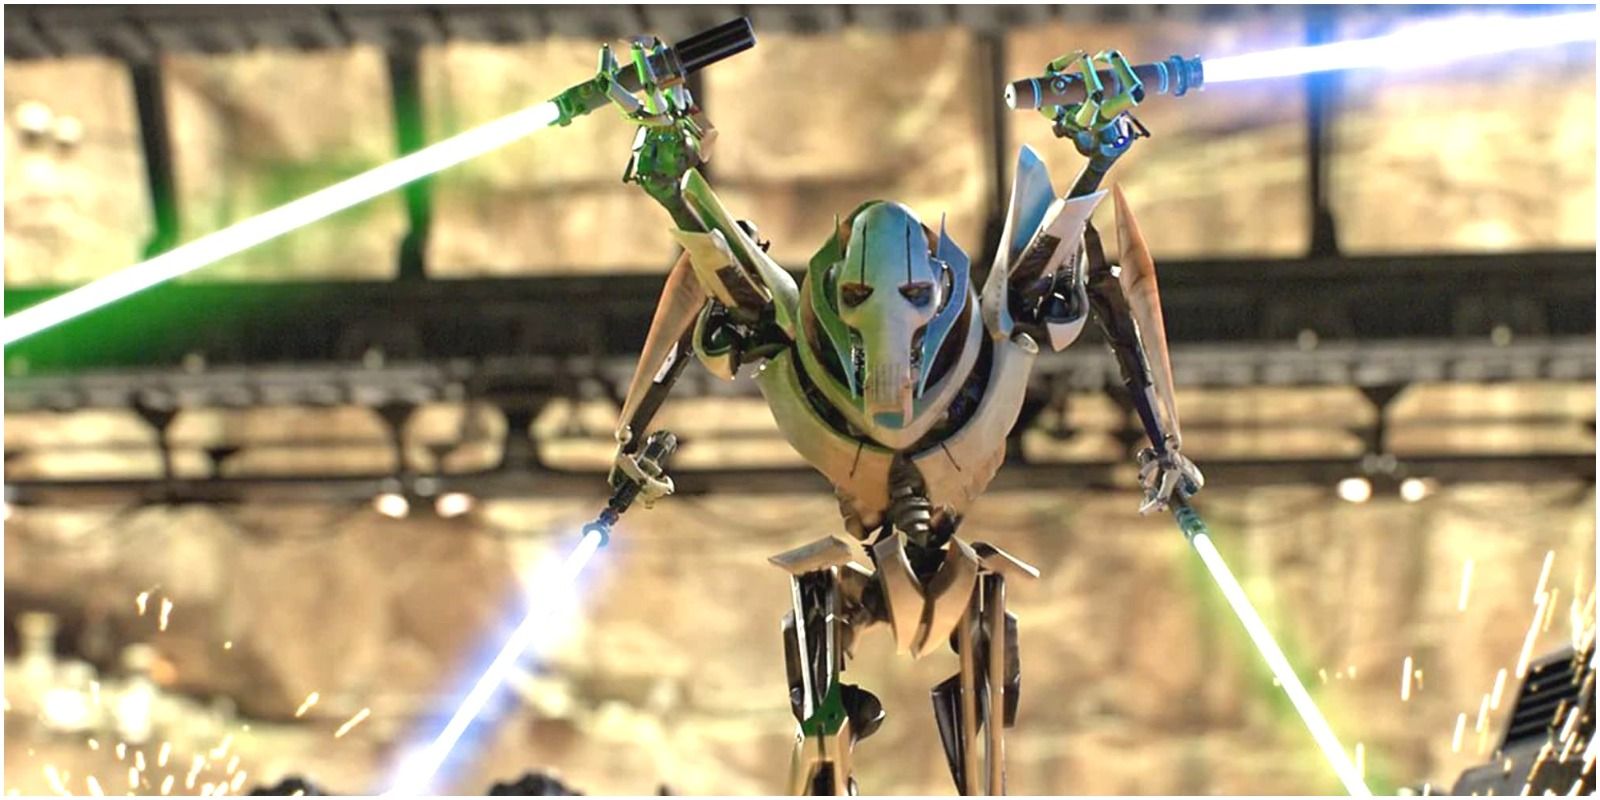 General Grievous from the Star Wars prequel trilogy